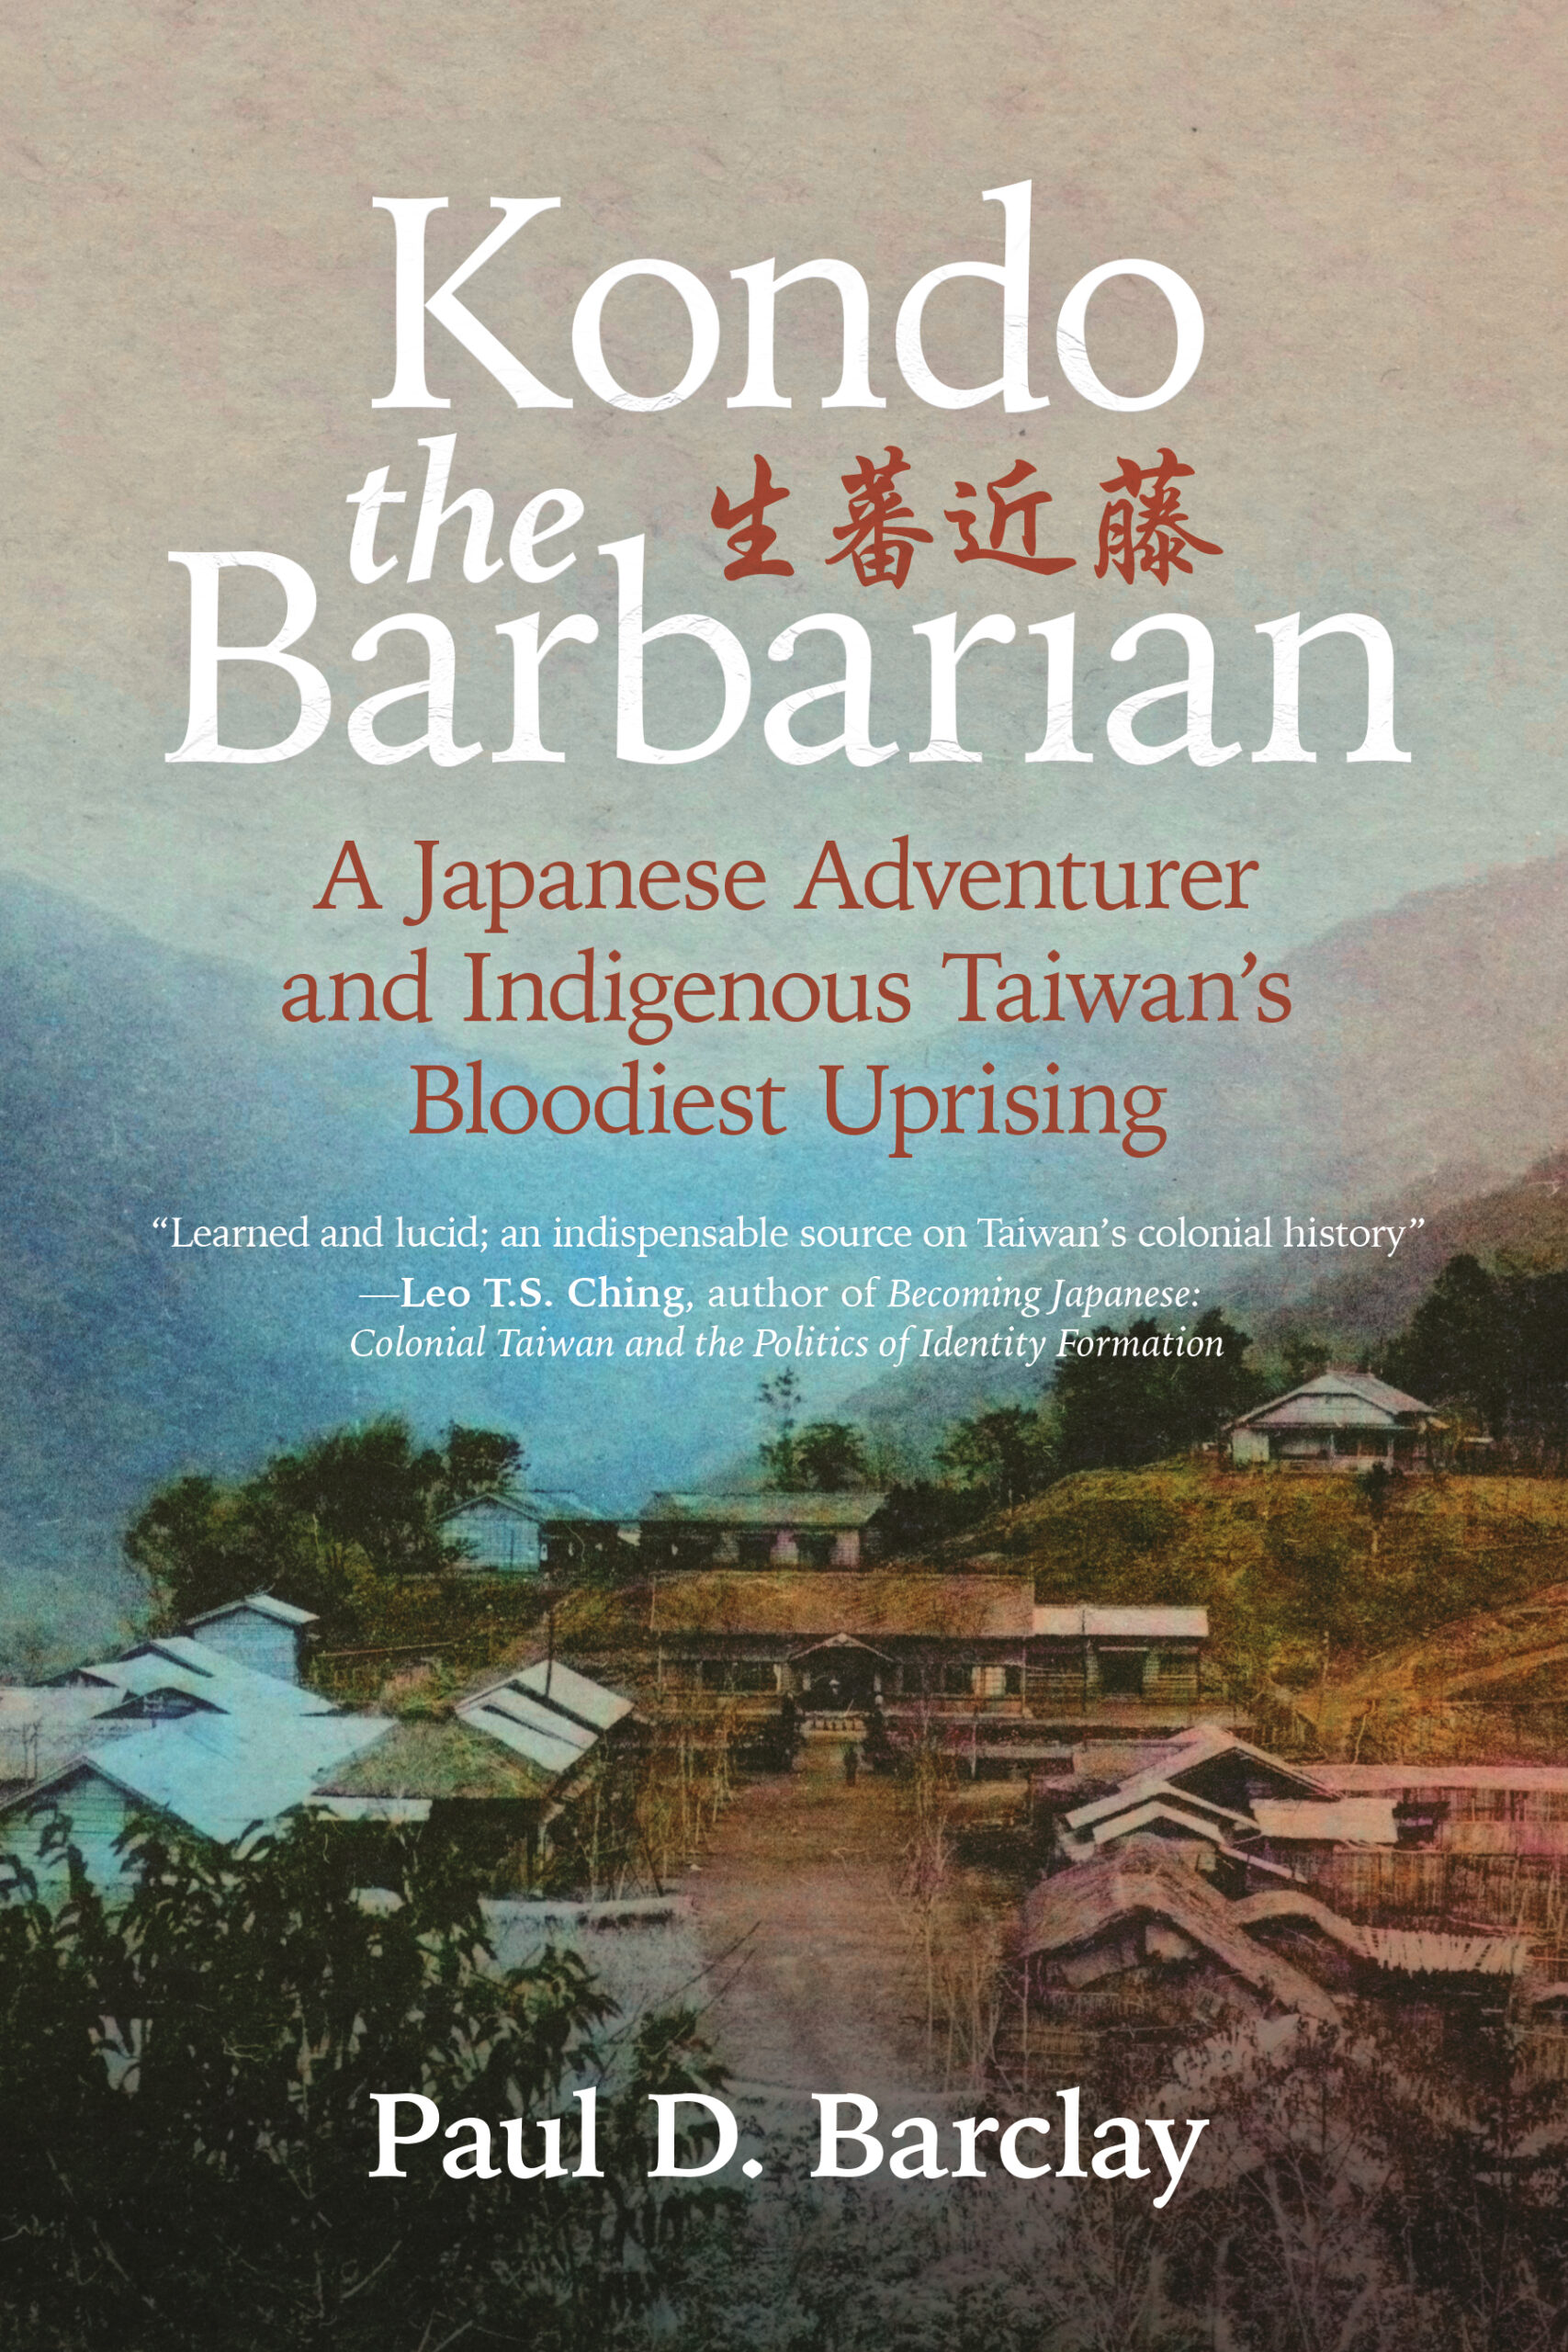 The cover of Kondo the Barbarian, by Paul D. Barclay